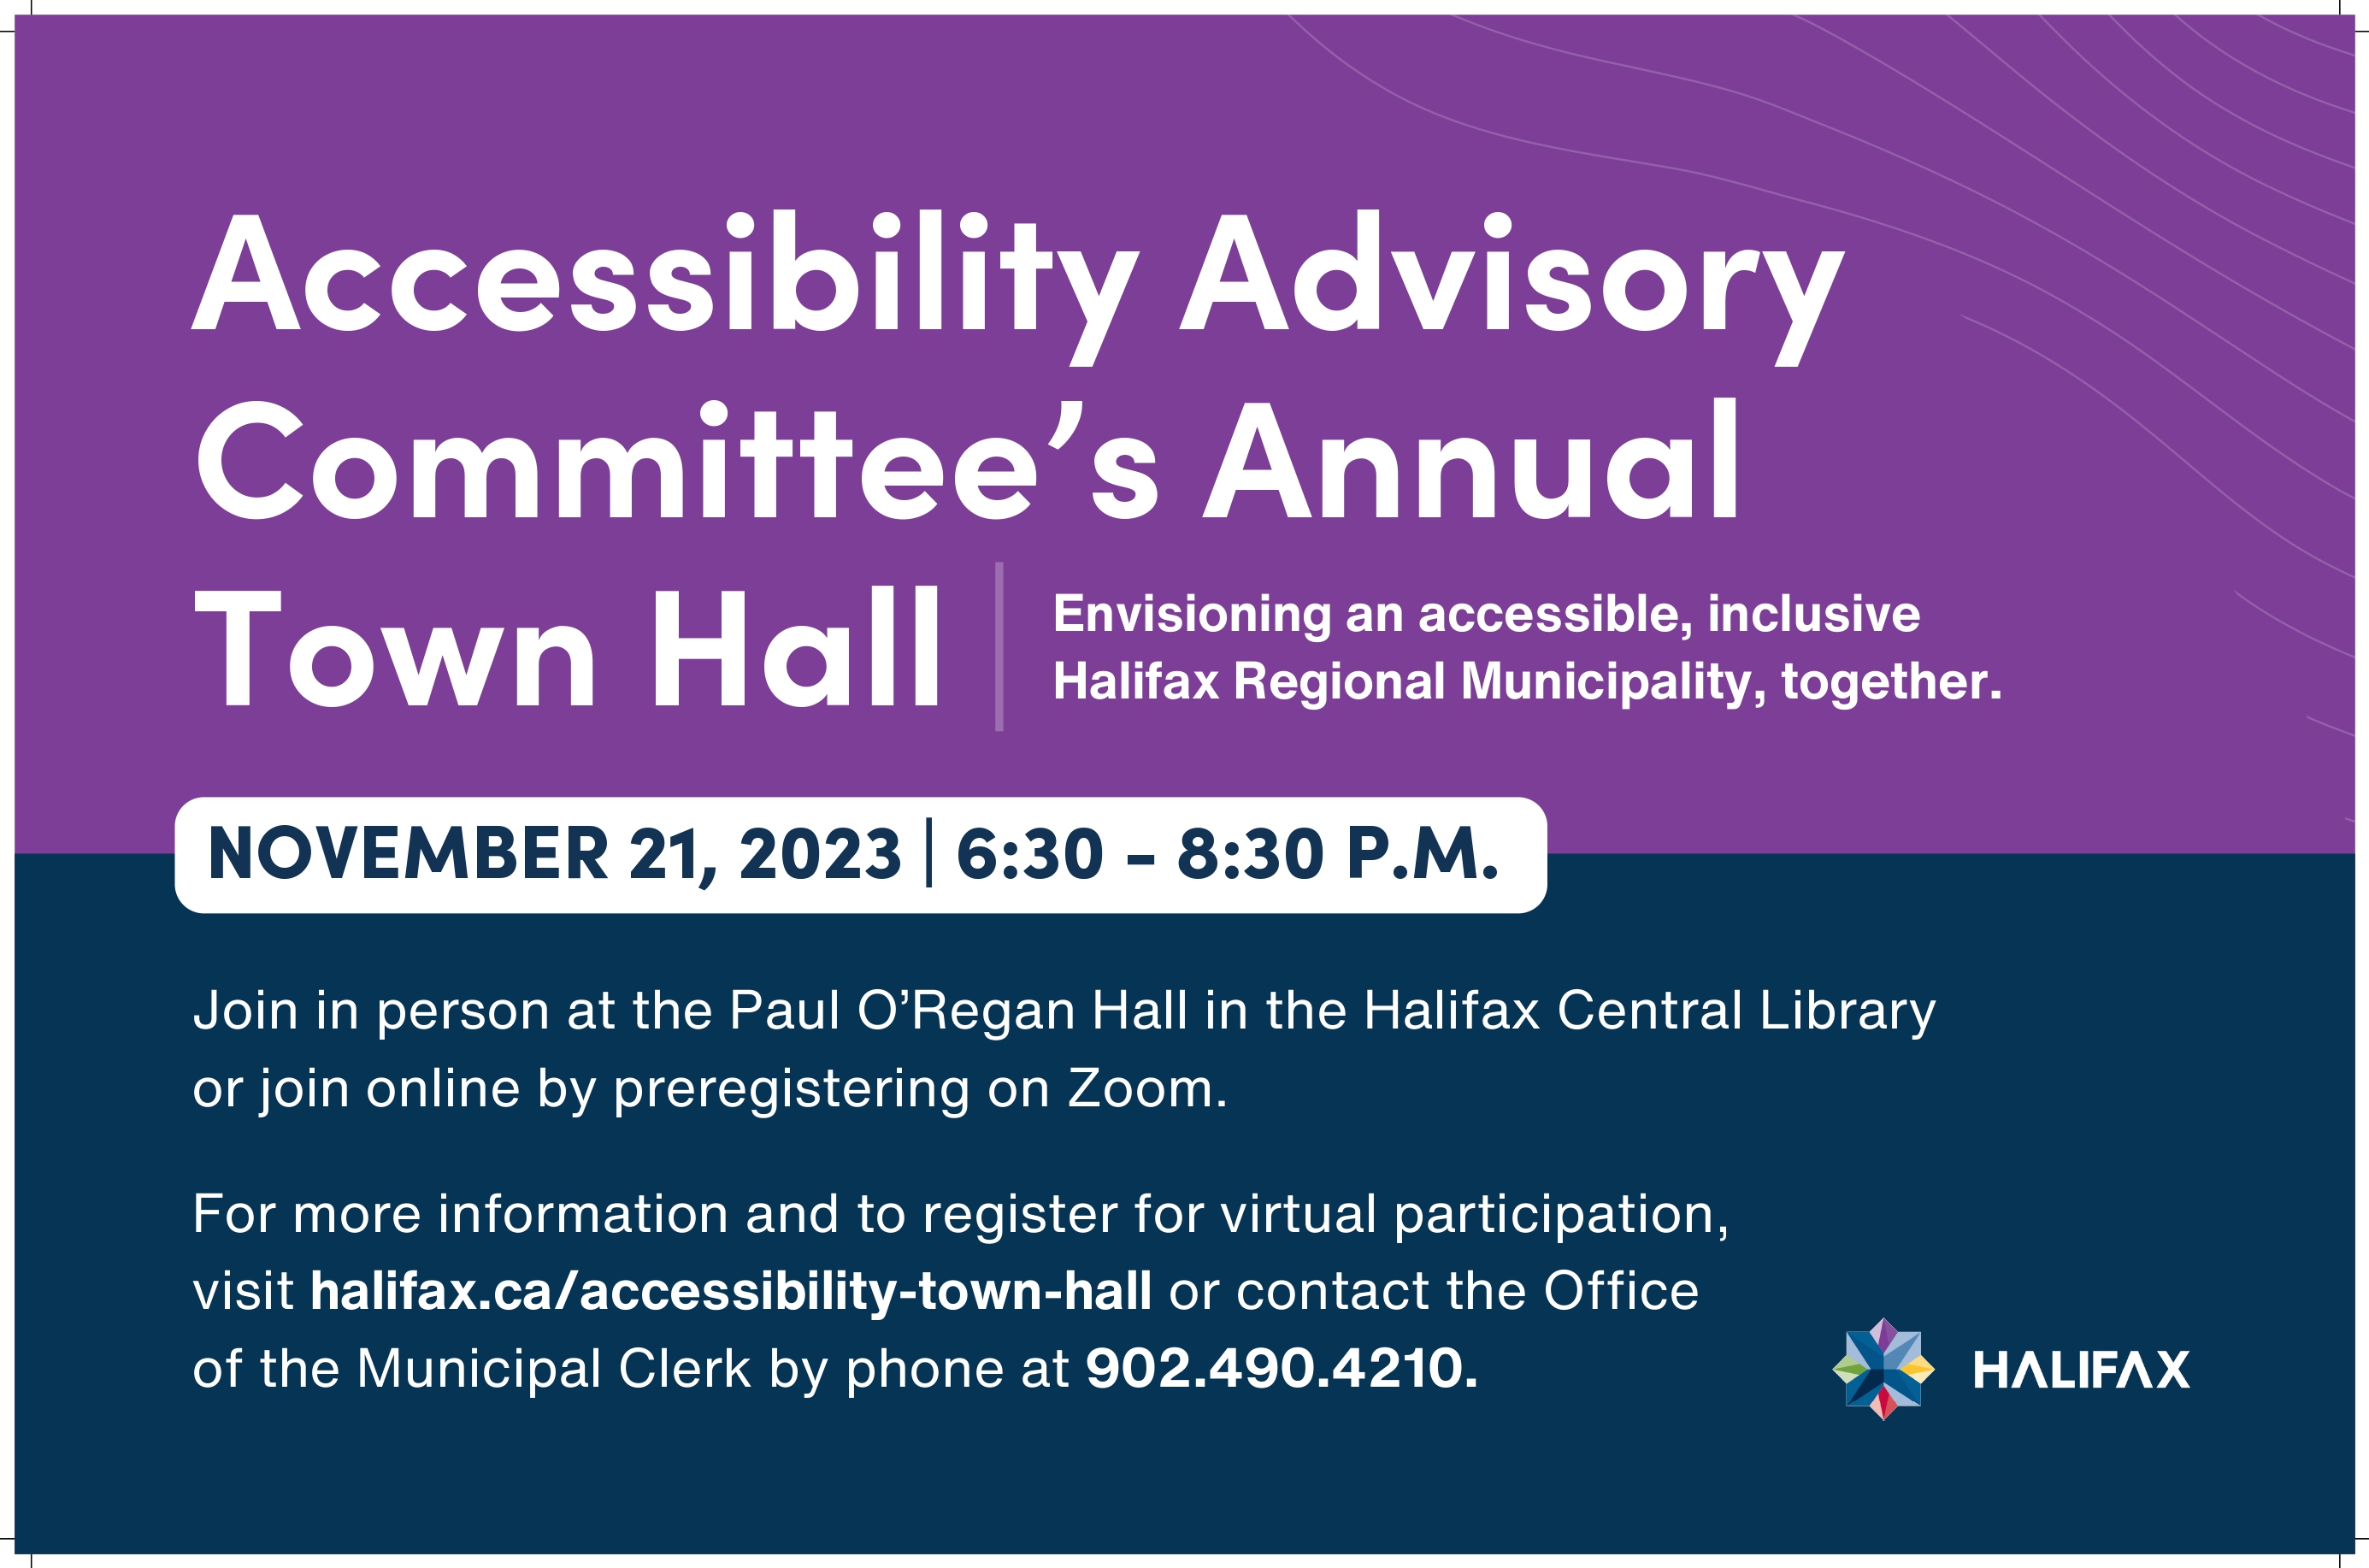 Accessibility Advisory Committee’s Annual Town Hall Poster